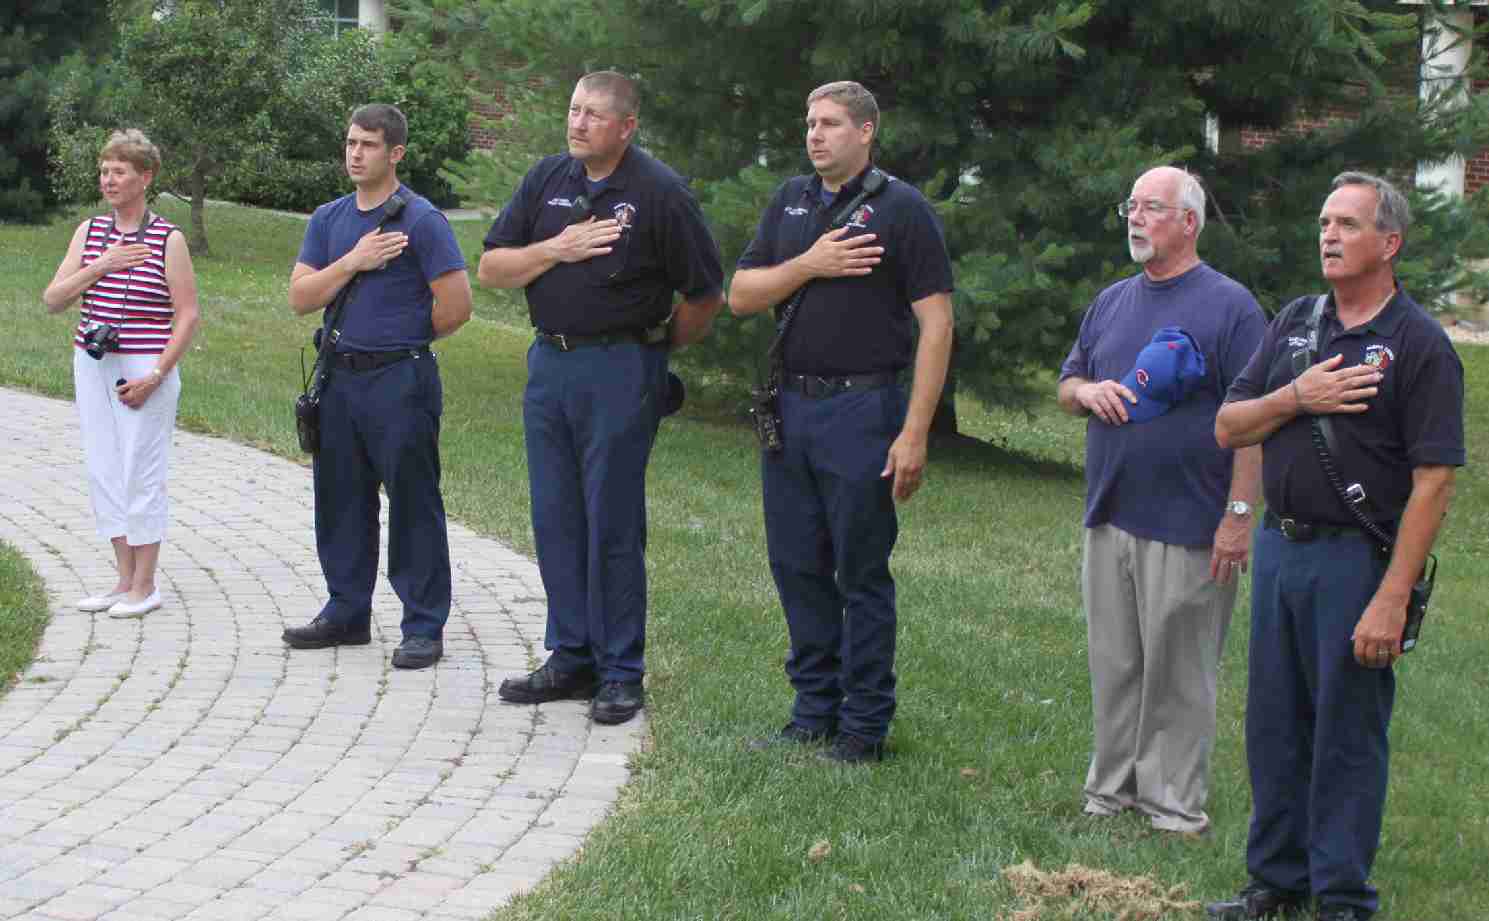 Members of the Great Falls Fire Dept. and Friends of the Great Falls Freedom Memorial recite the Pledge of Allegiance.